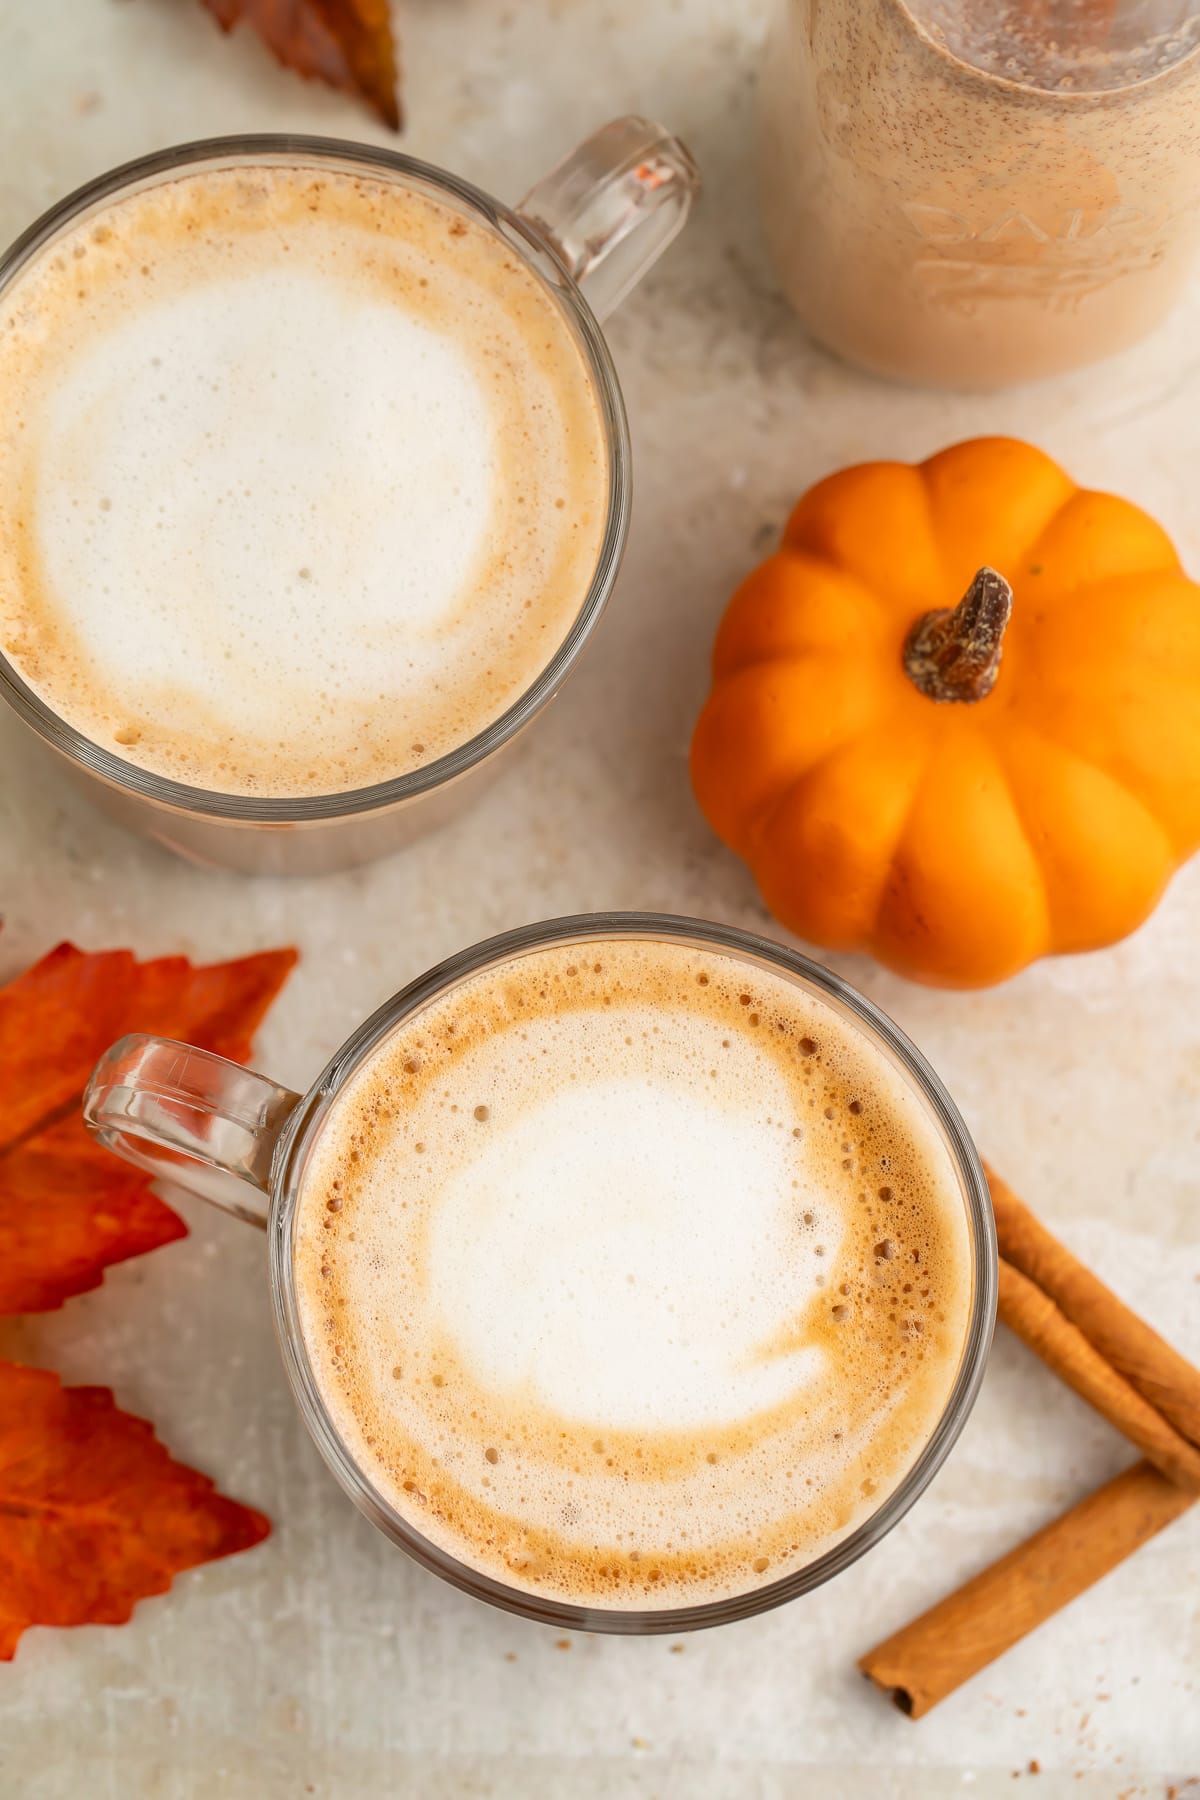 Overhead view of two clear glass coffee mugs holding a pumpkin spice latte with rich pumpkin spice creamer.